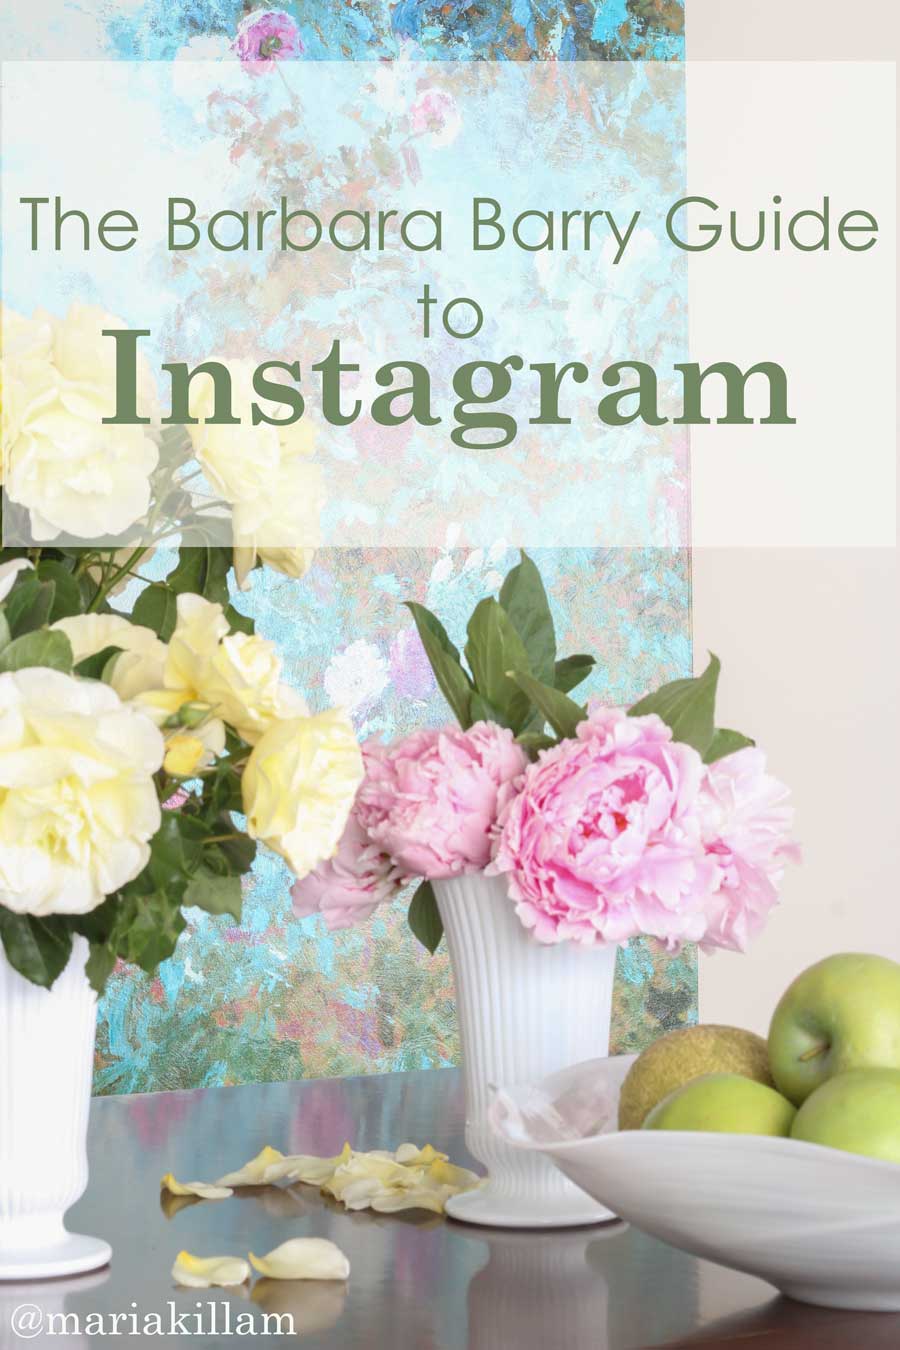 The Barbara Barry Guide to Instagram (My Living Room)